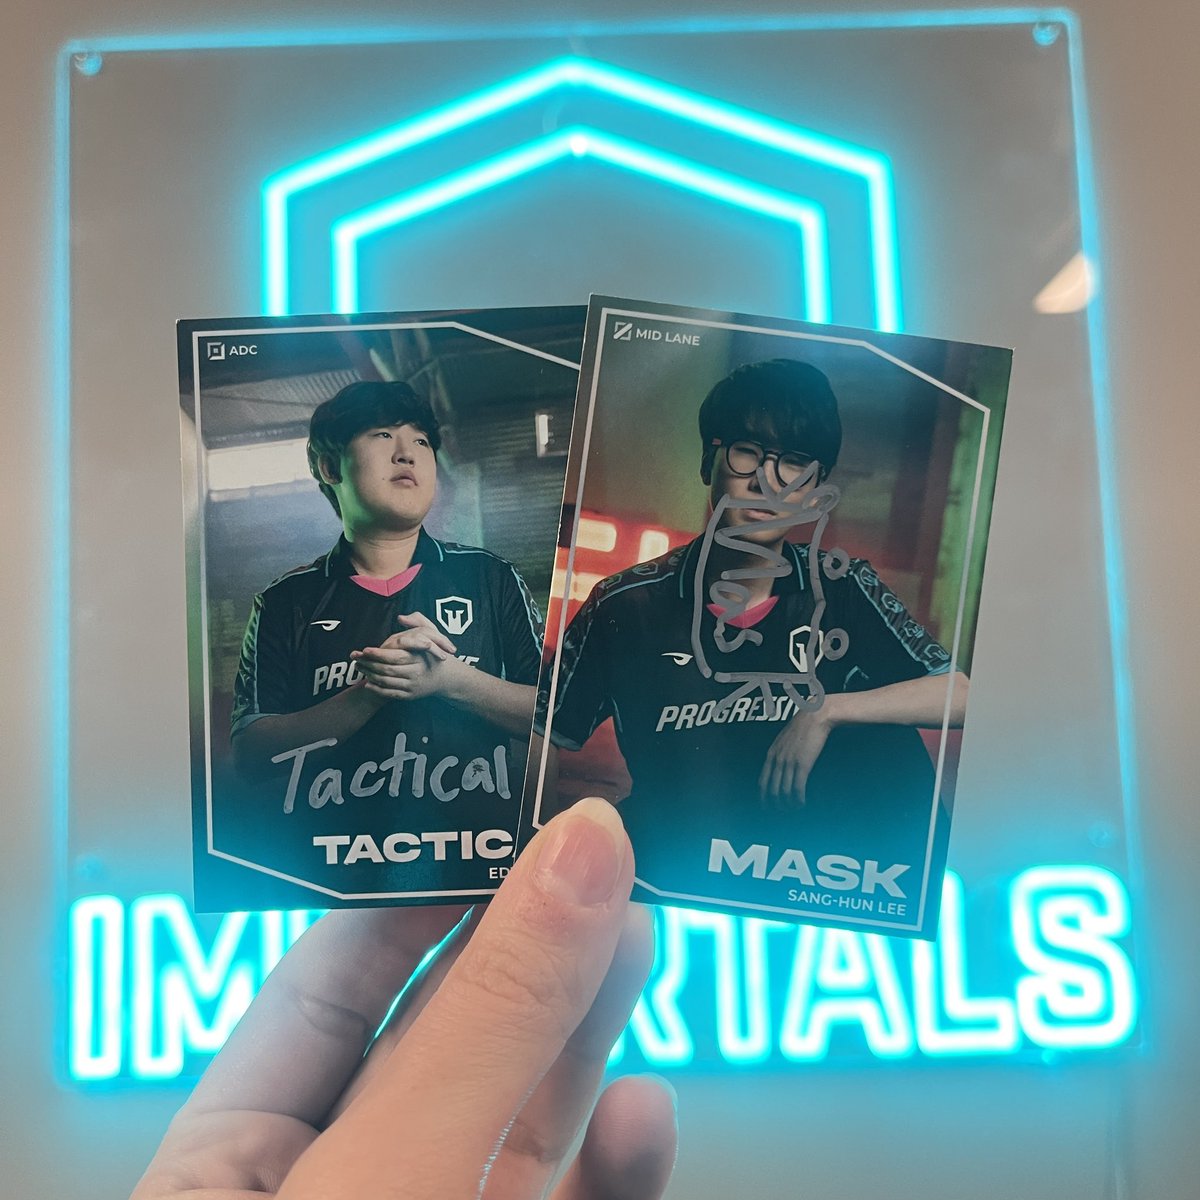 HEY YOU! 🤨🫵 Did you know that you can get our exclusive Immortals Progressive trading card packs tomorrow at #LCS Spring Finals? Some packs even include special prizes and signed cards! Be sure to swing by our booth to grab yours, along with some free boba! #IMTWIN